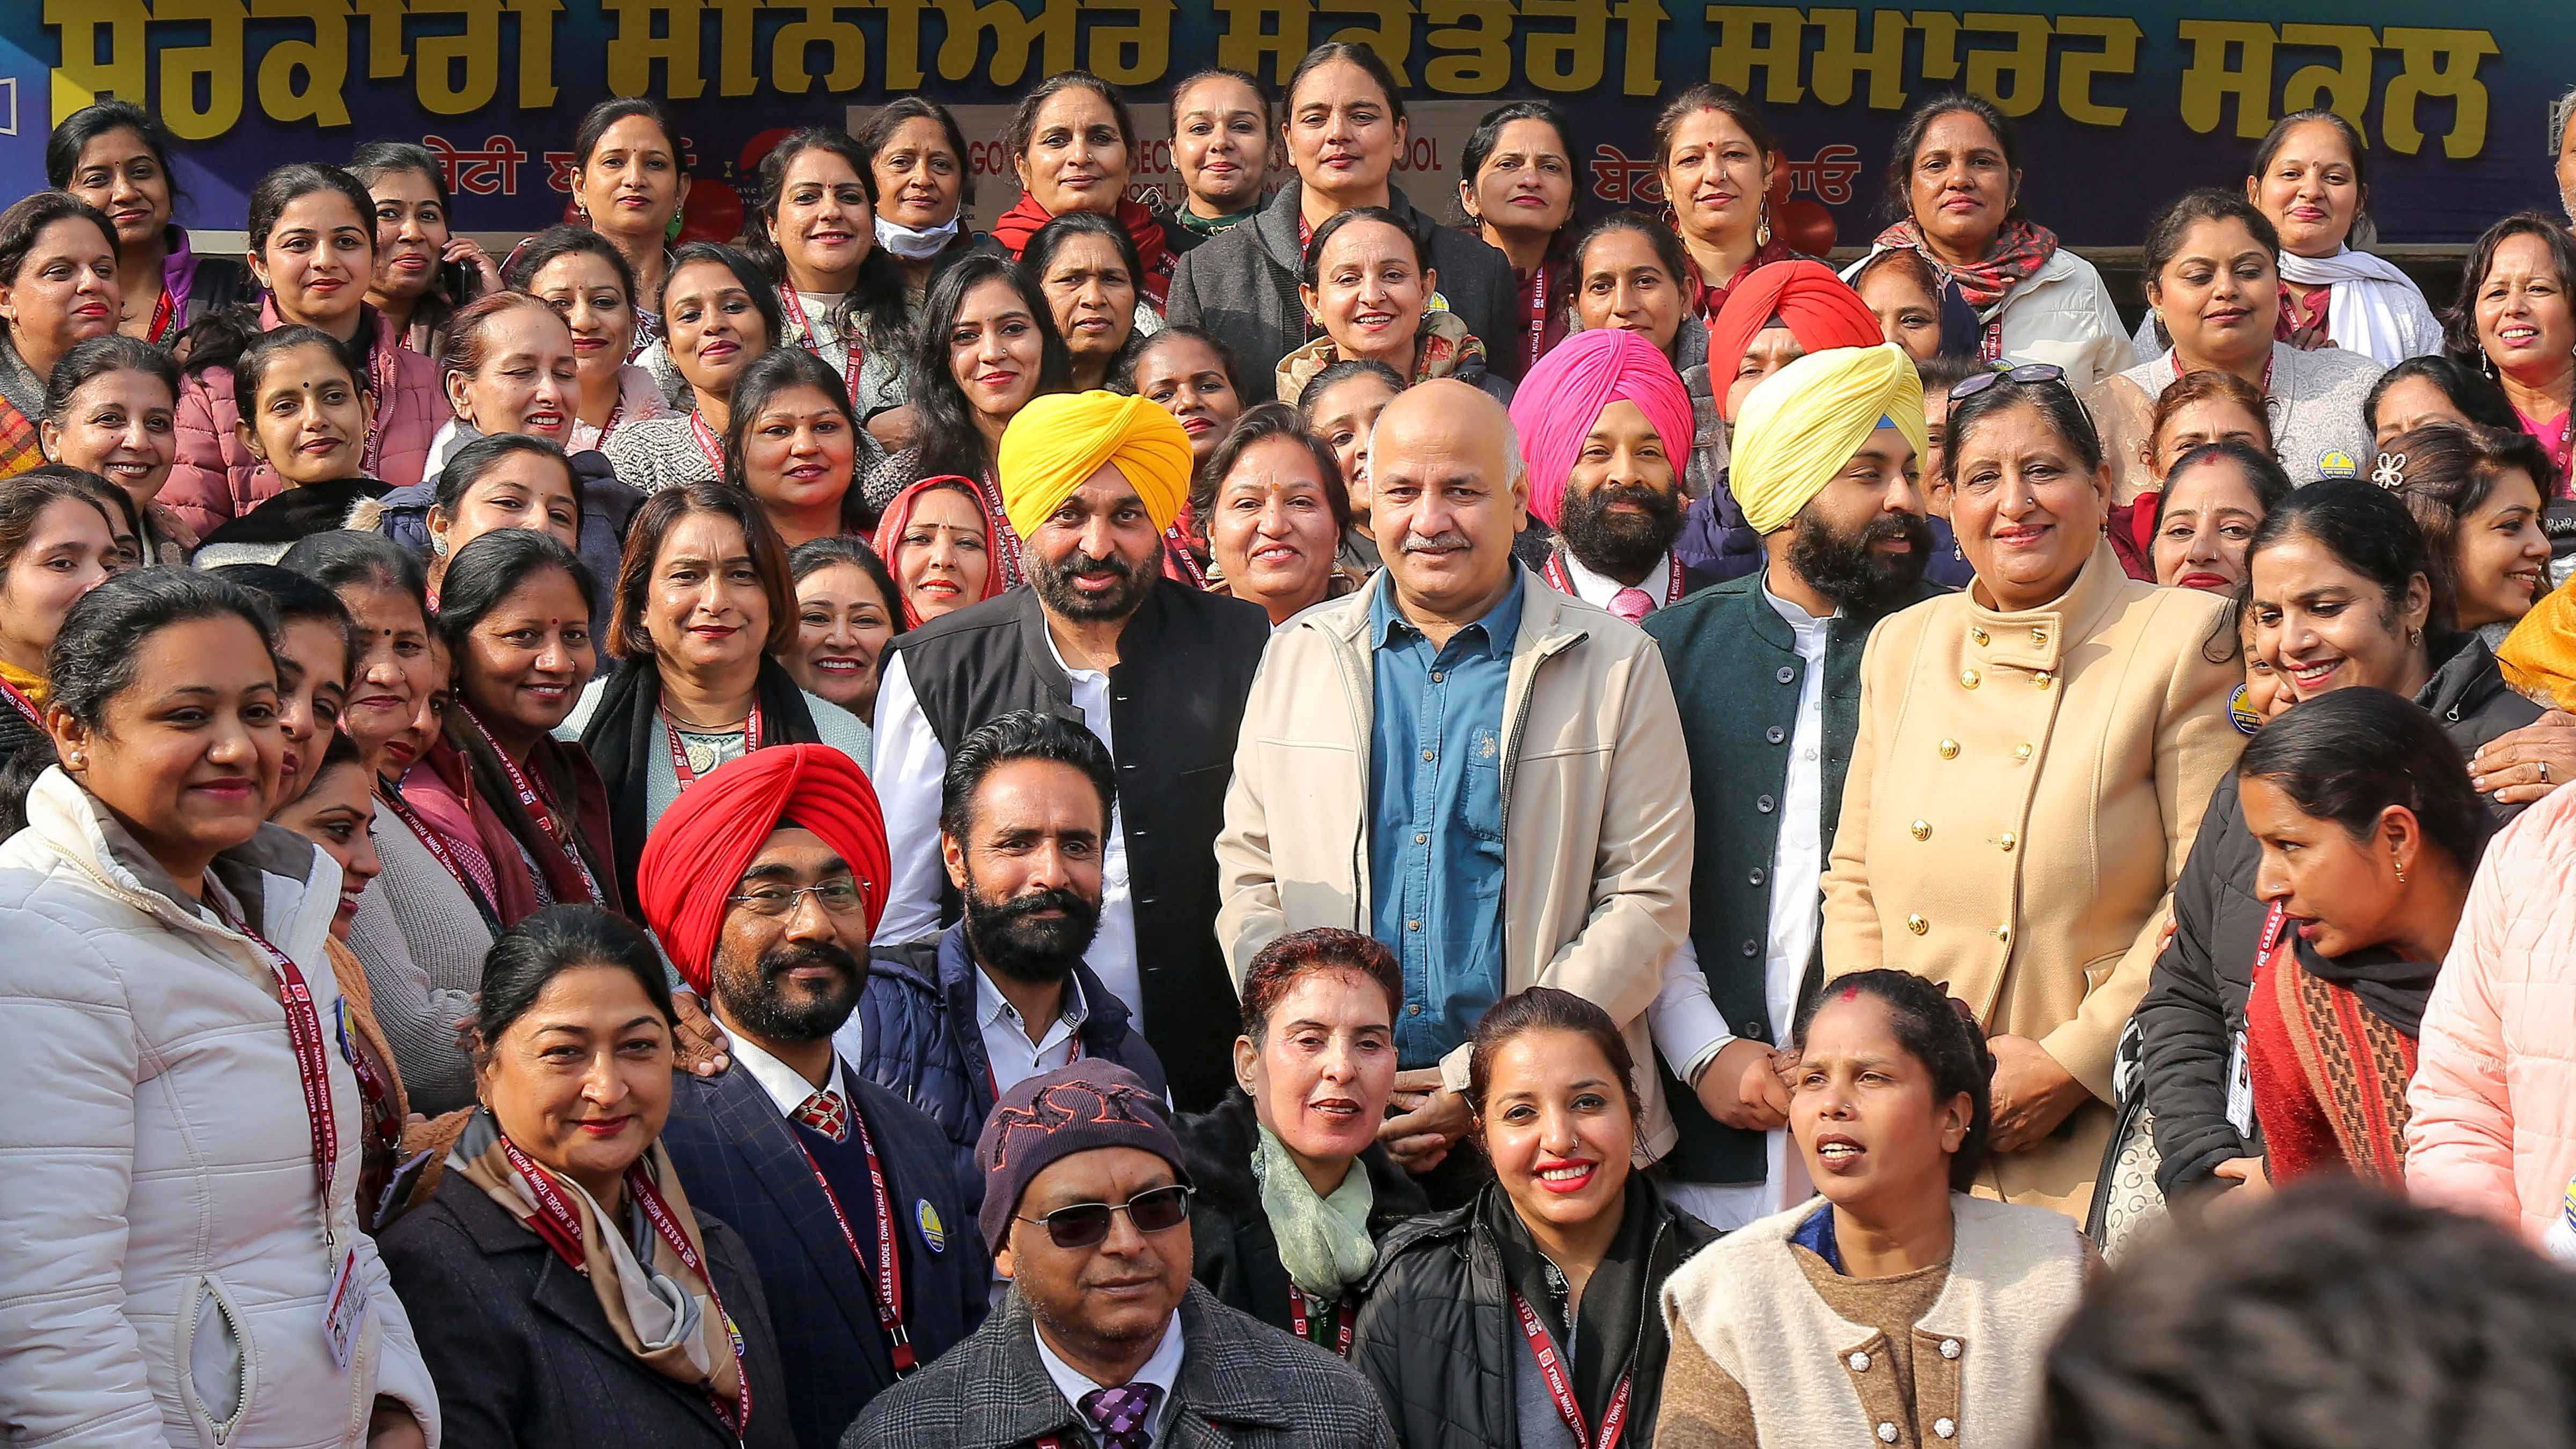 Bhagwant Mann along with Manish Sisodia poses for a group photo during the Parent-Teacher Meeting. Credit: PTI Photo